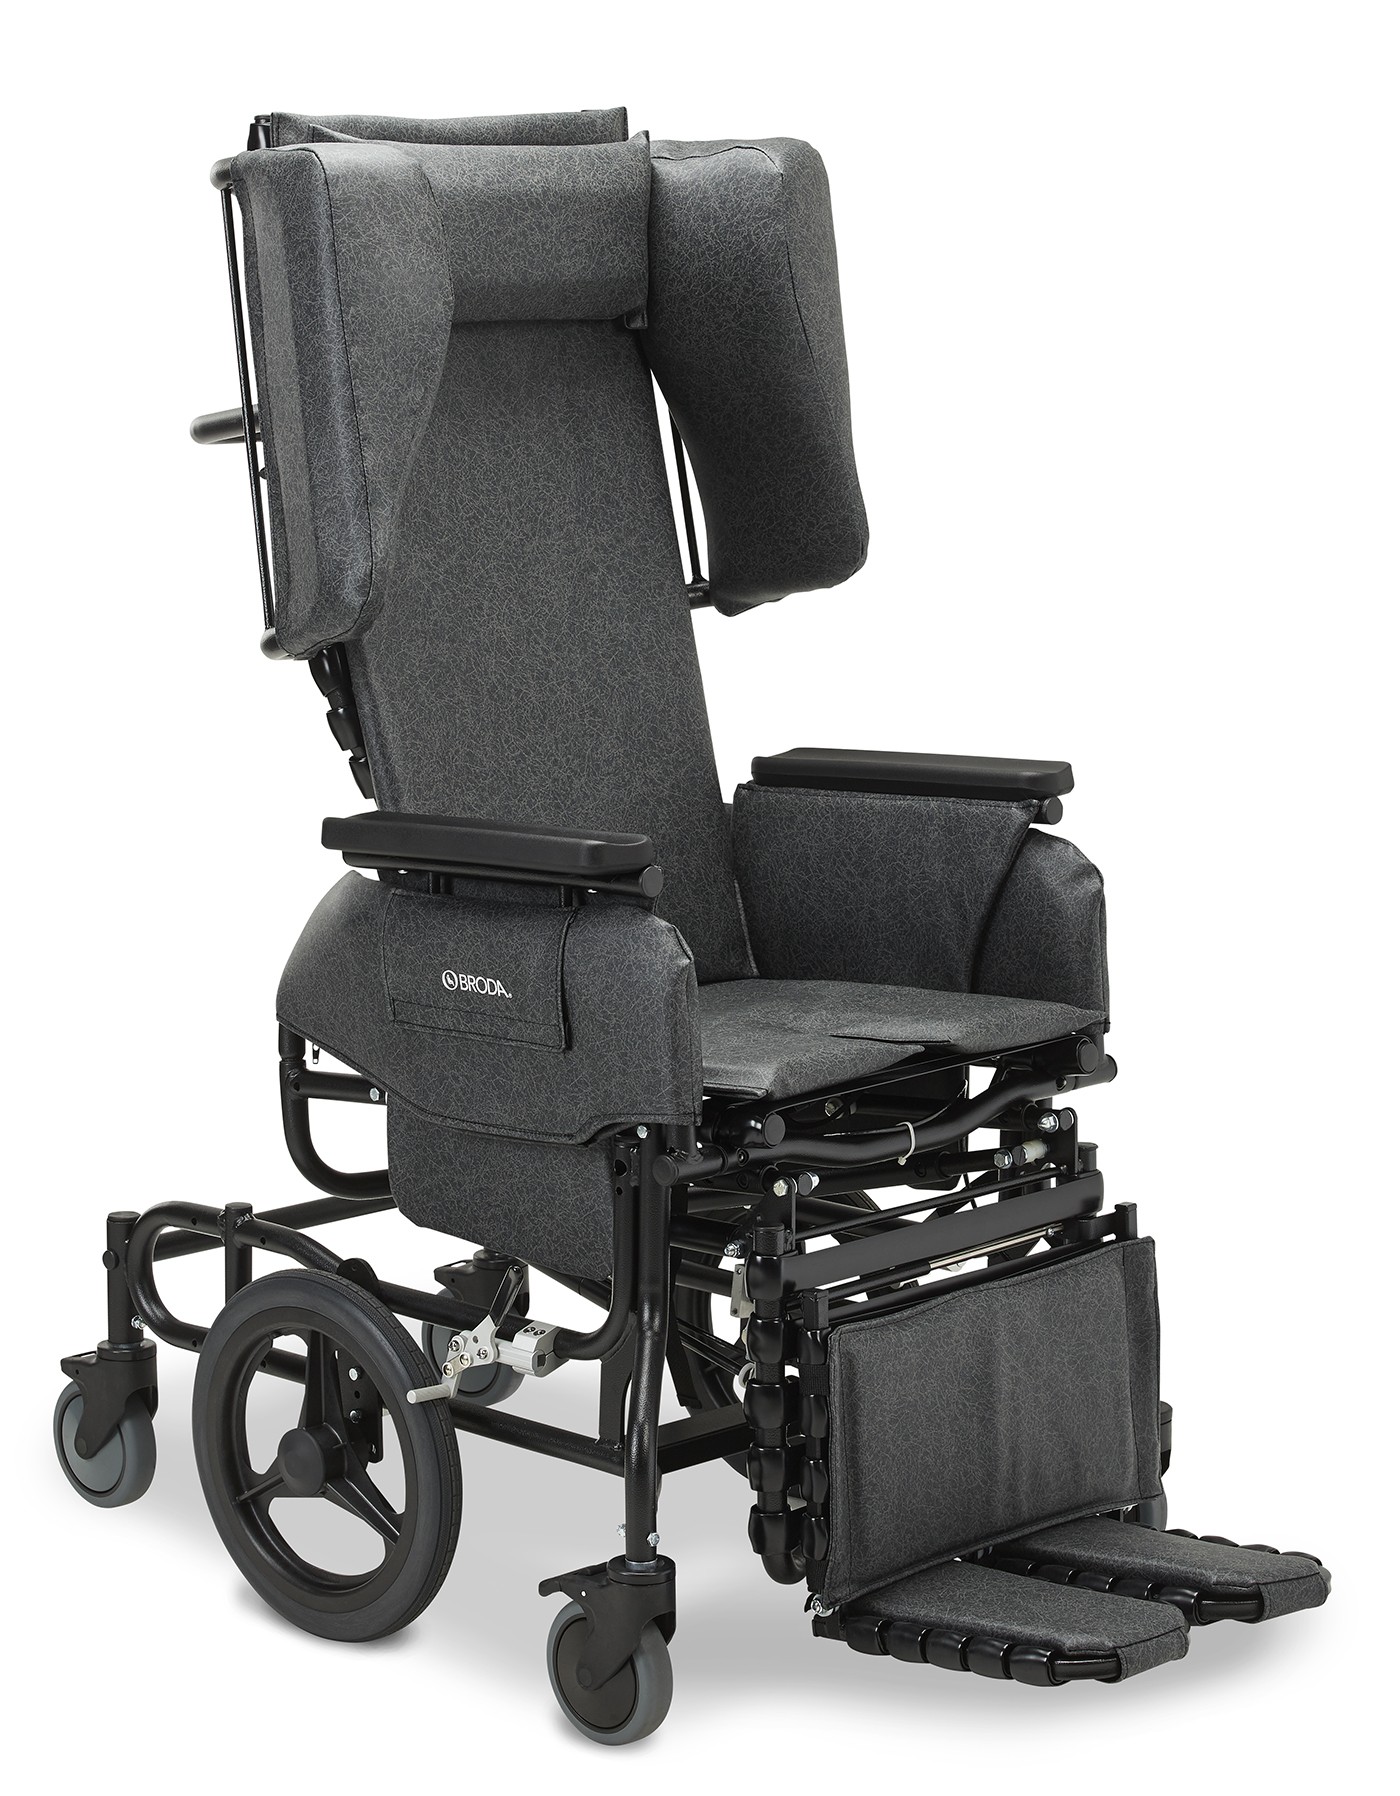 The Broda midline positioning wheelchair with optional large, self-propelling rear wheels.